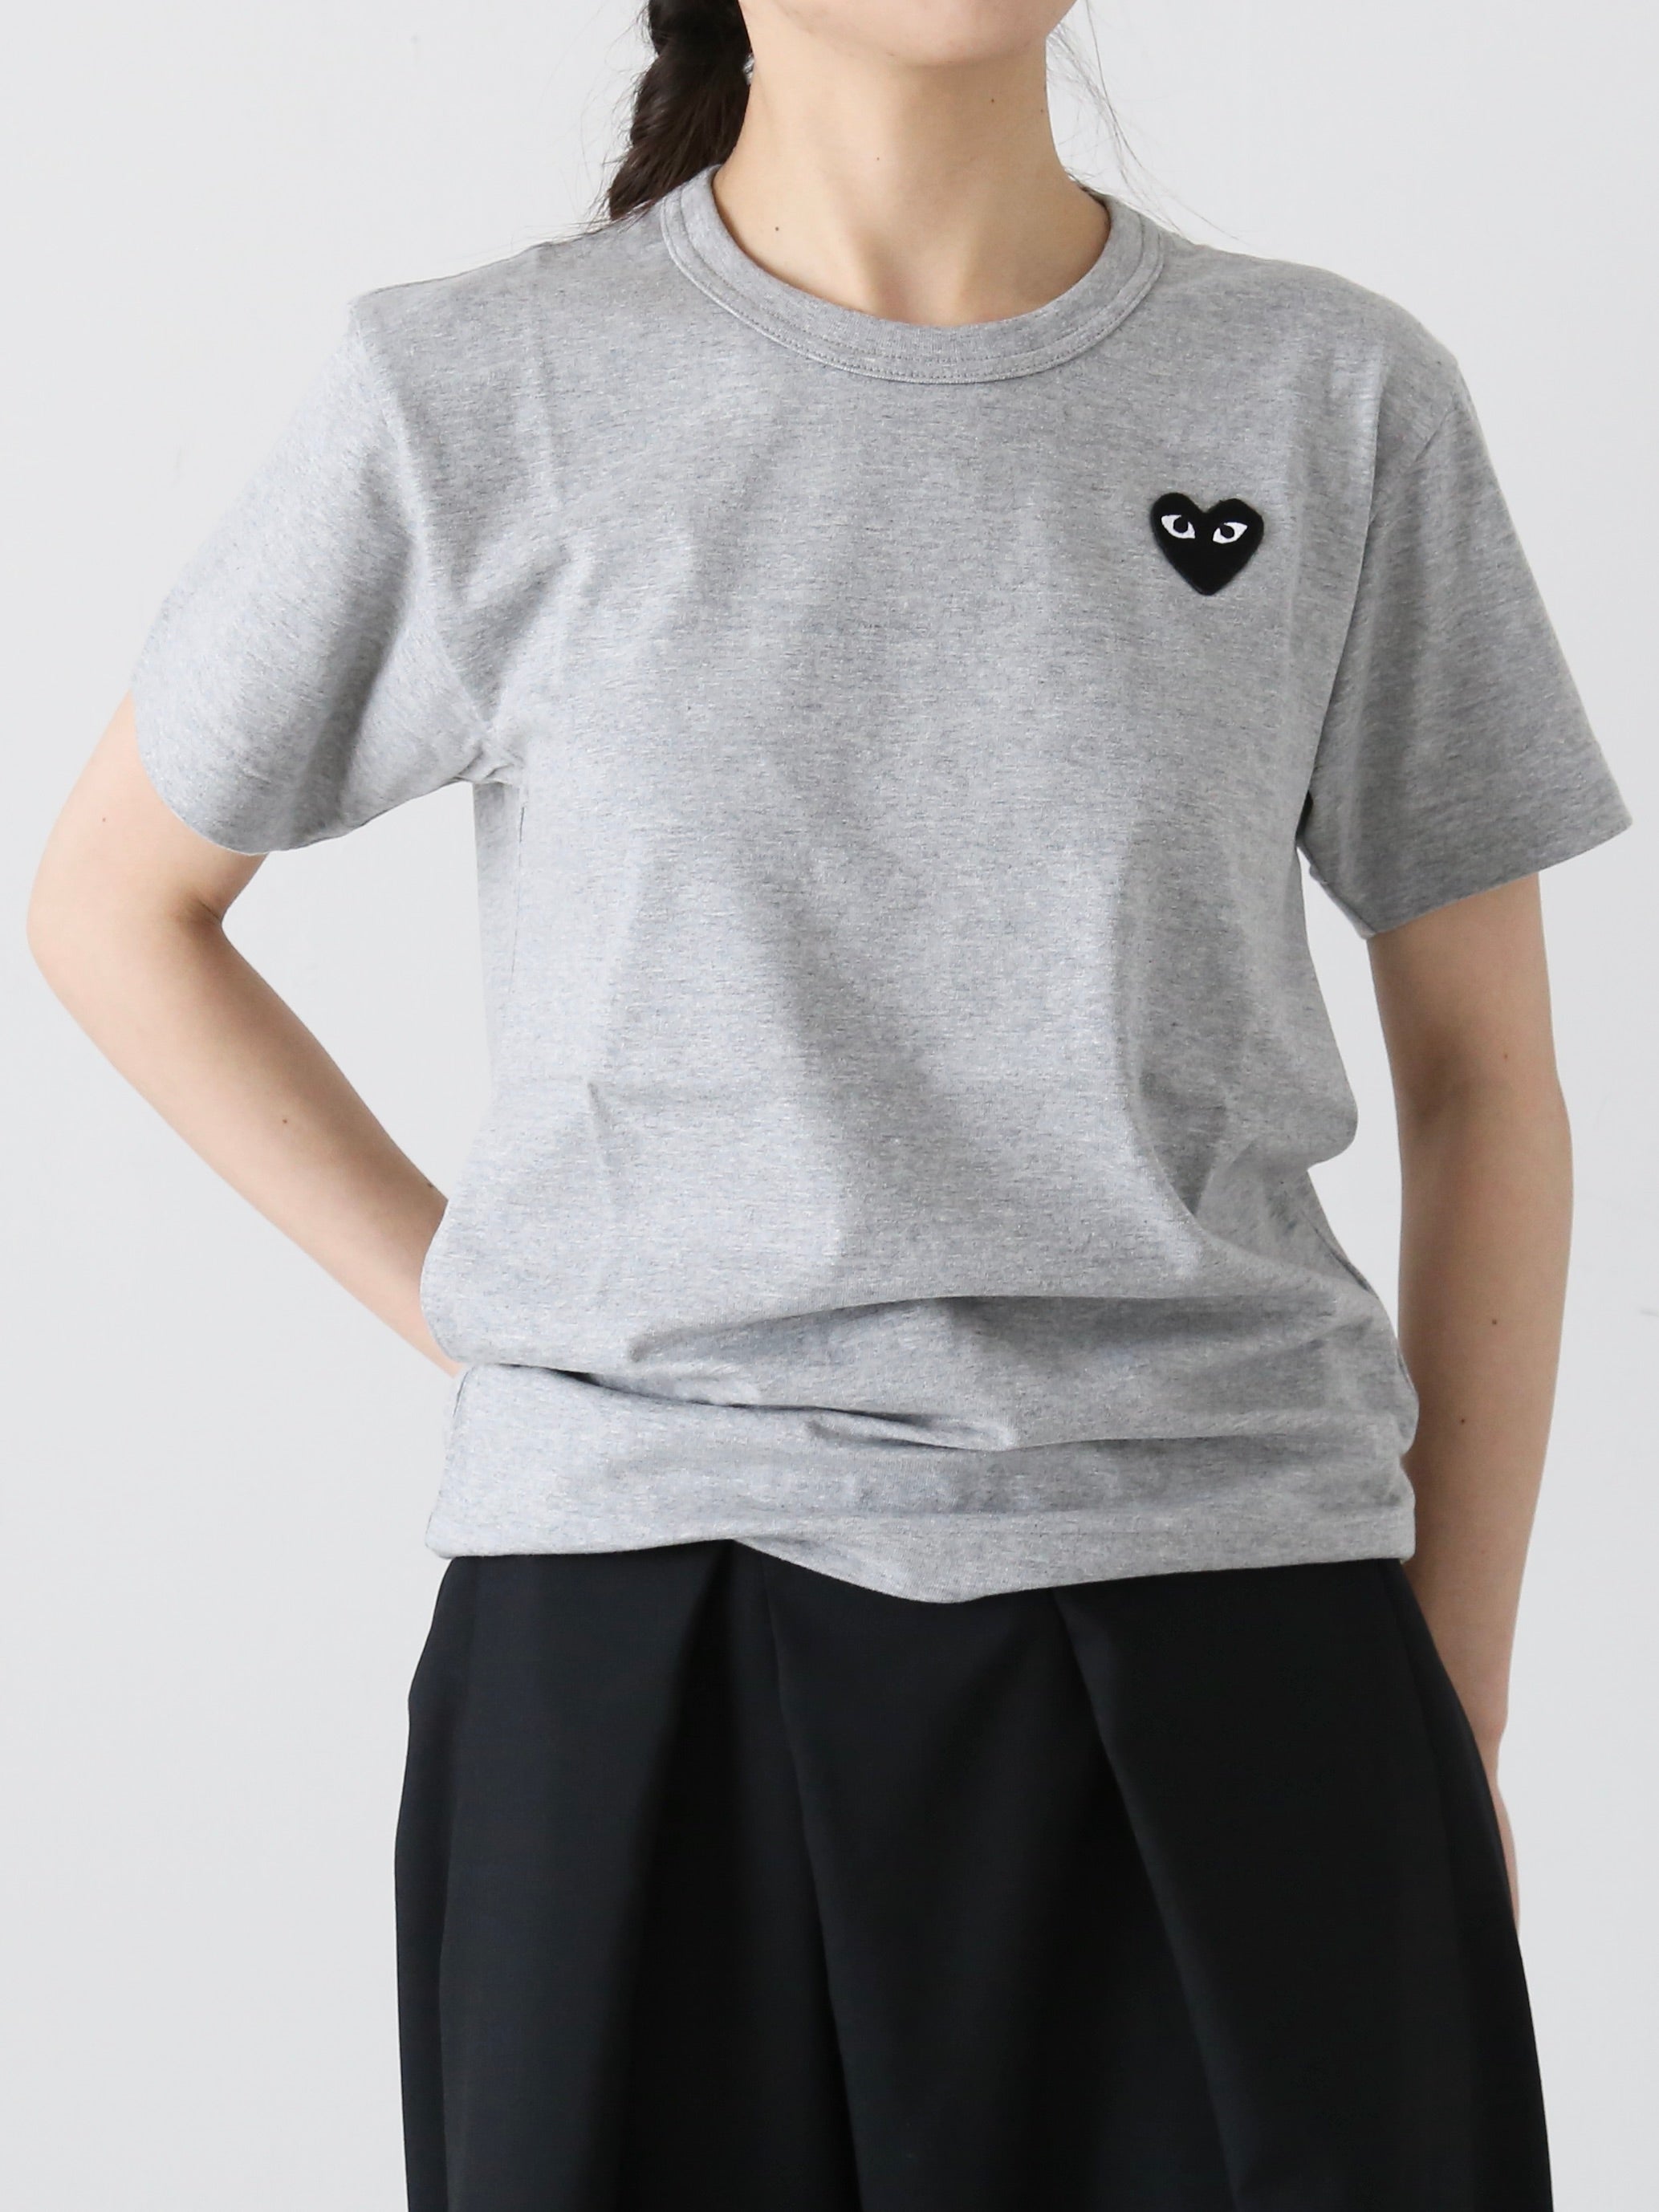 PLAY COMME des GARCONS Tシャツ(グレー×ブラック) [AX-T076-051]